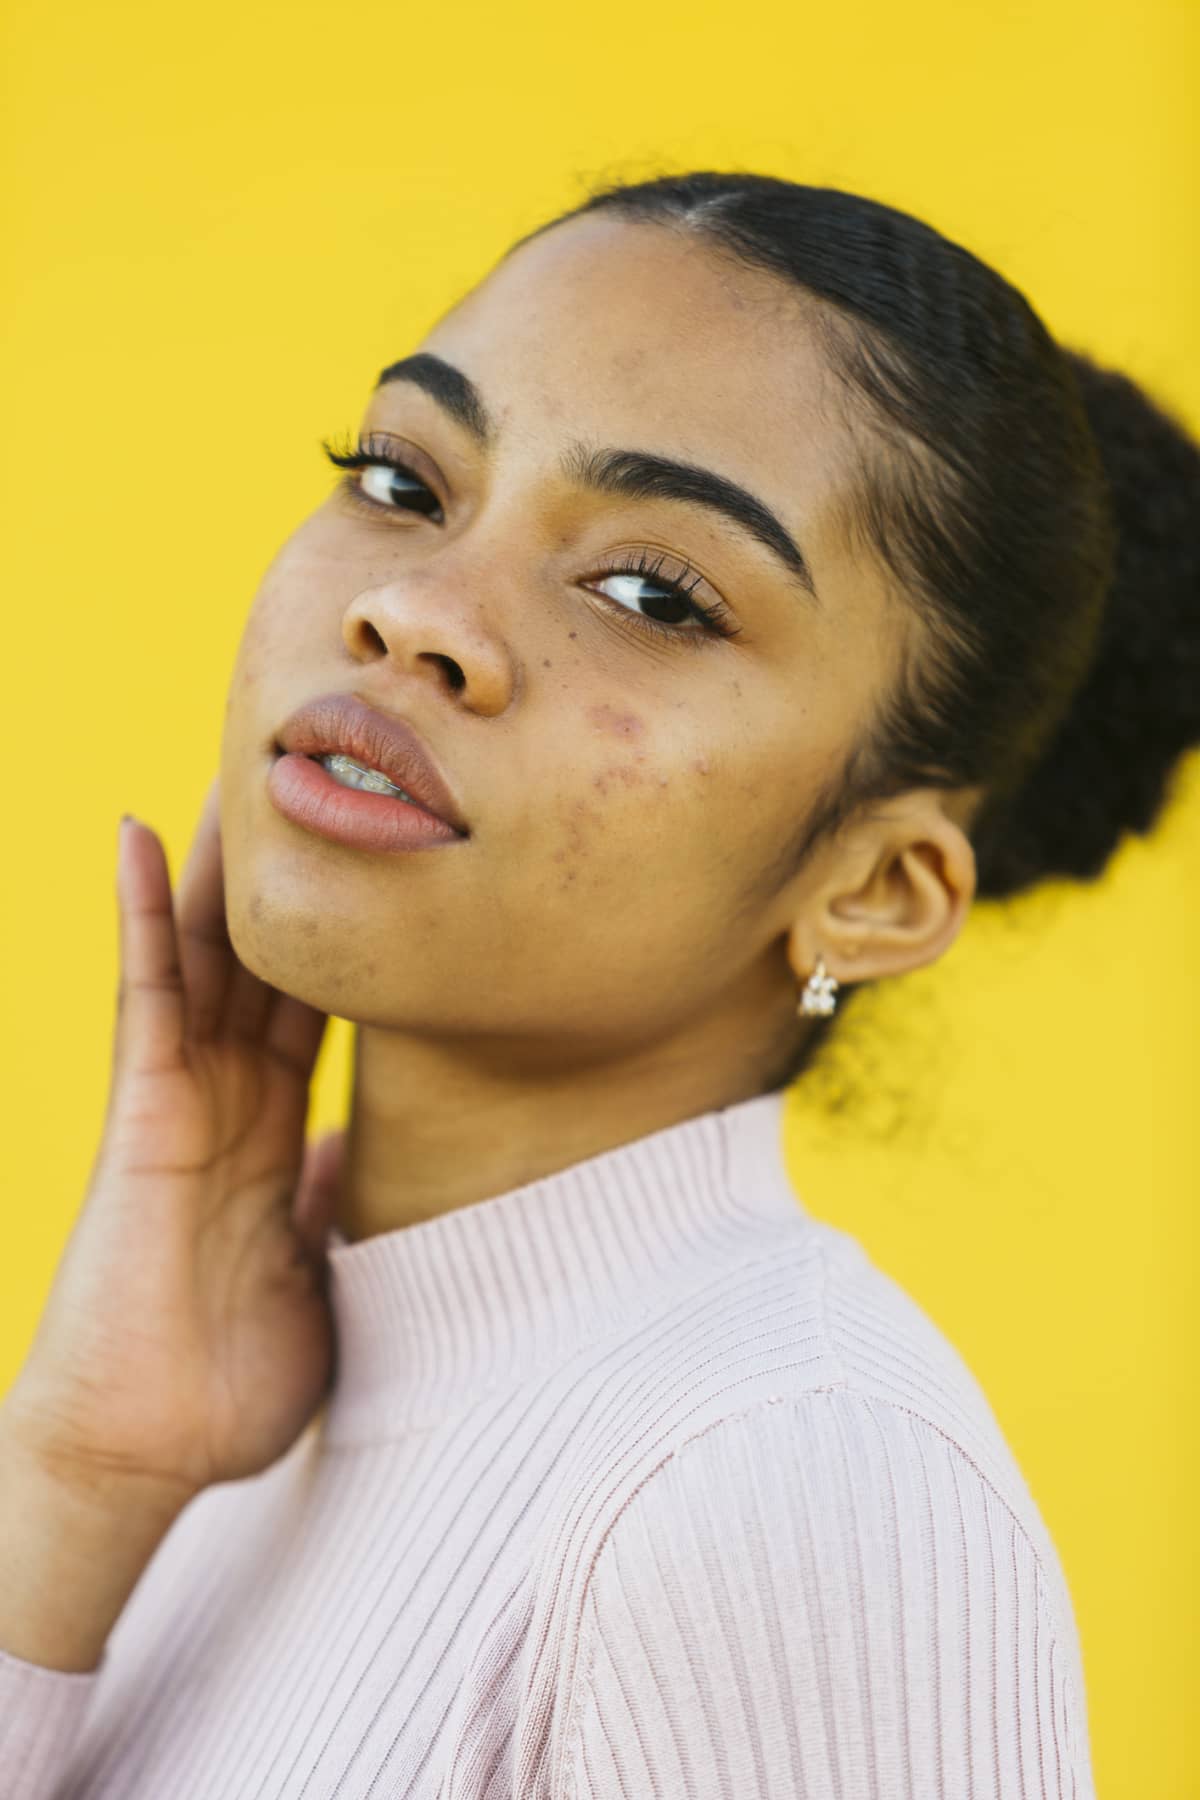 Portrait of a woman with acne posing in front of a yellow background